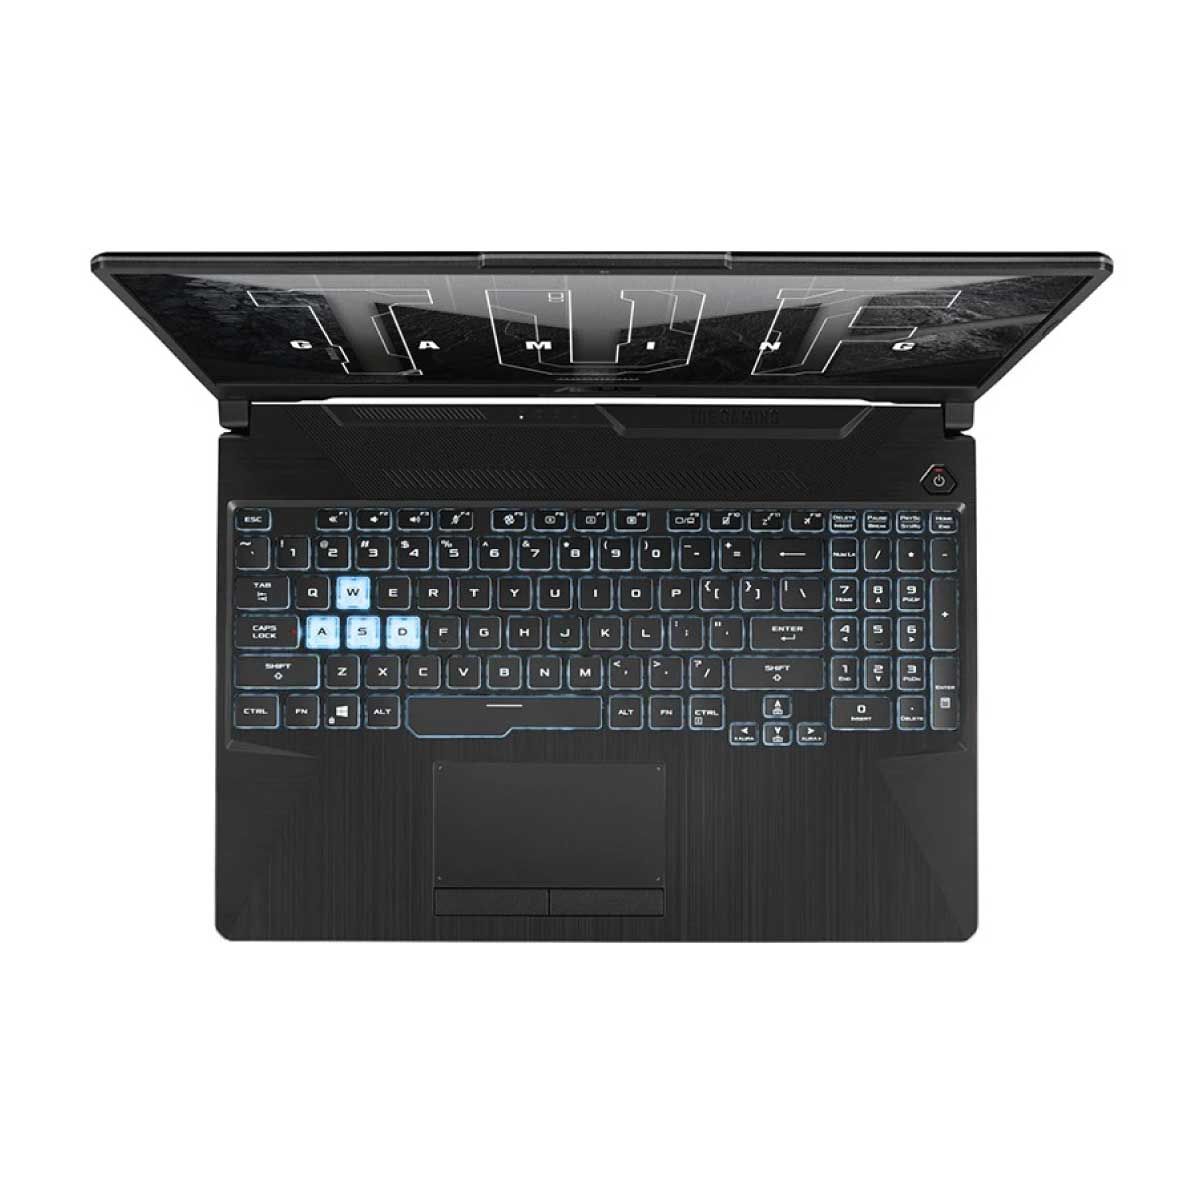 NOTEBOOK (โน้ตบุ๊ค) ASUS TUF GAMING A15 FA506NF-HN012W (GRAPHITE BLACK)